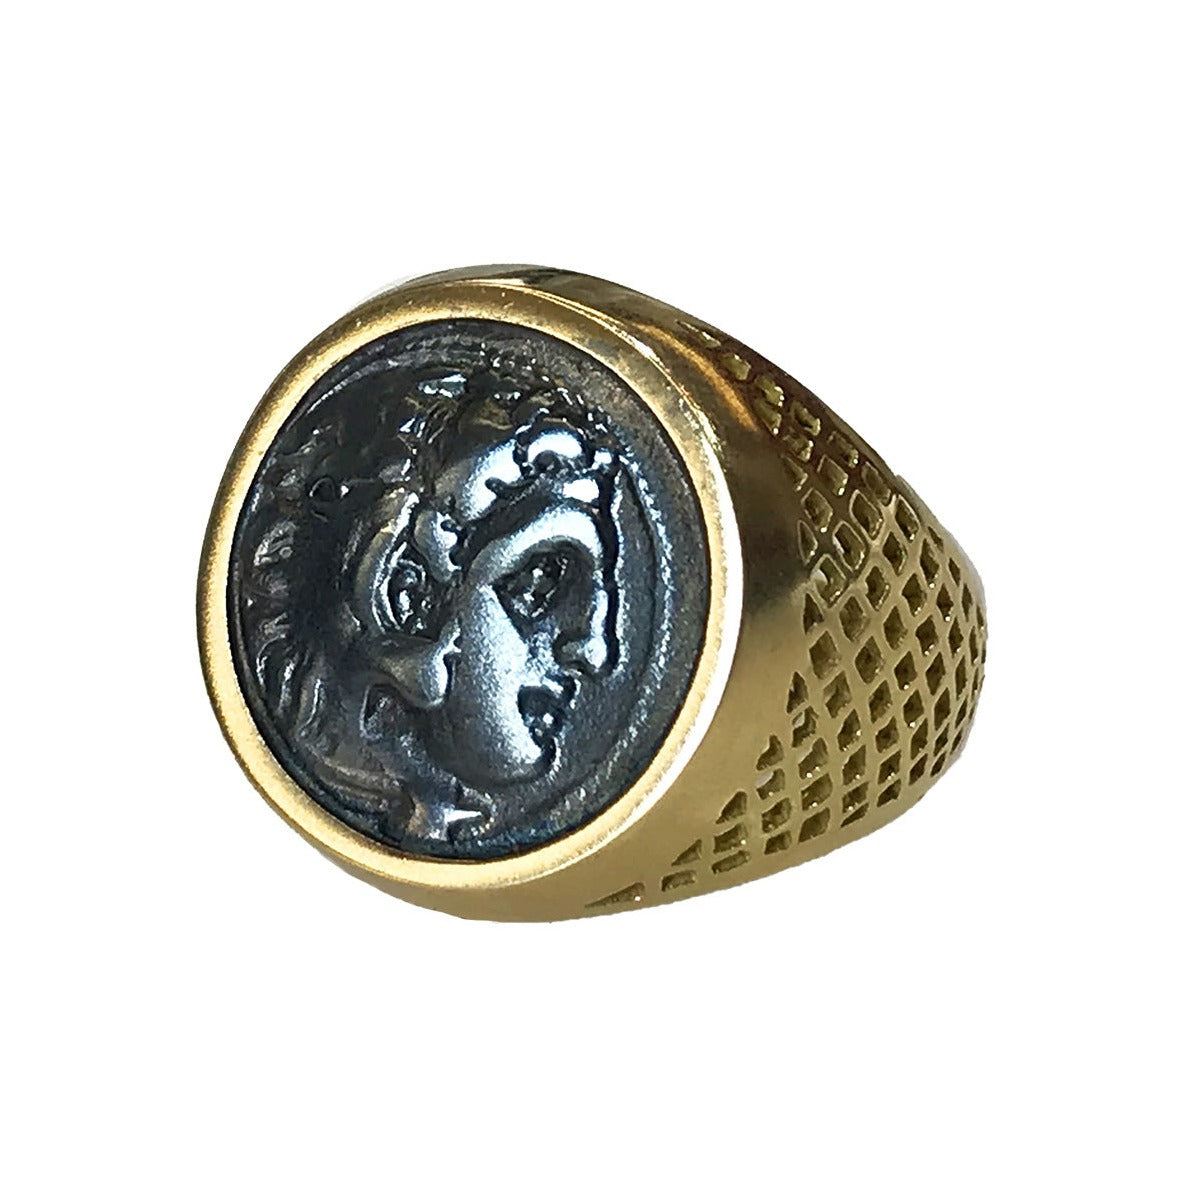 Signet Coin Ring